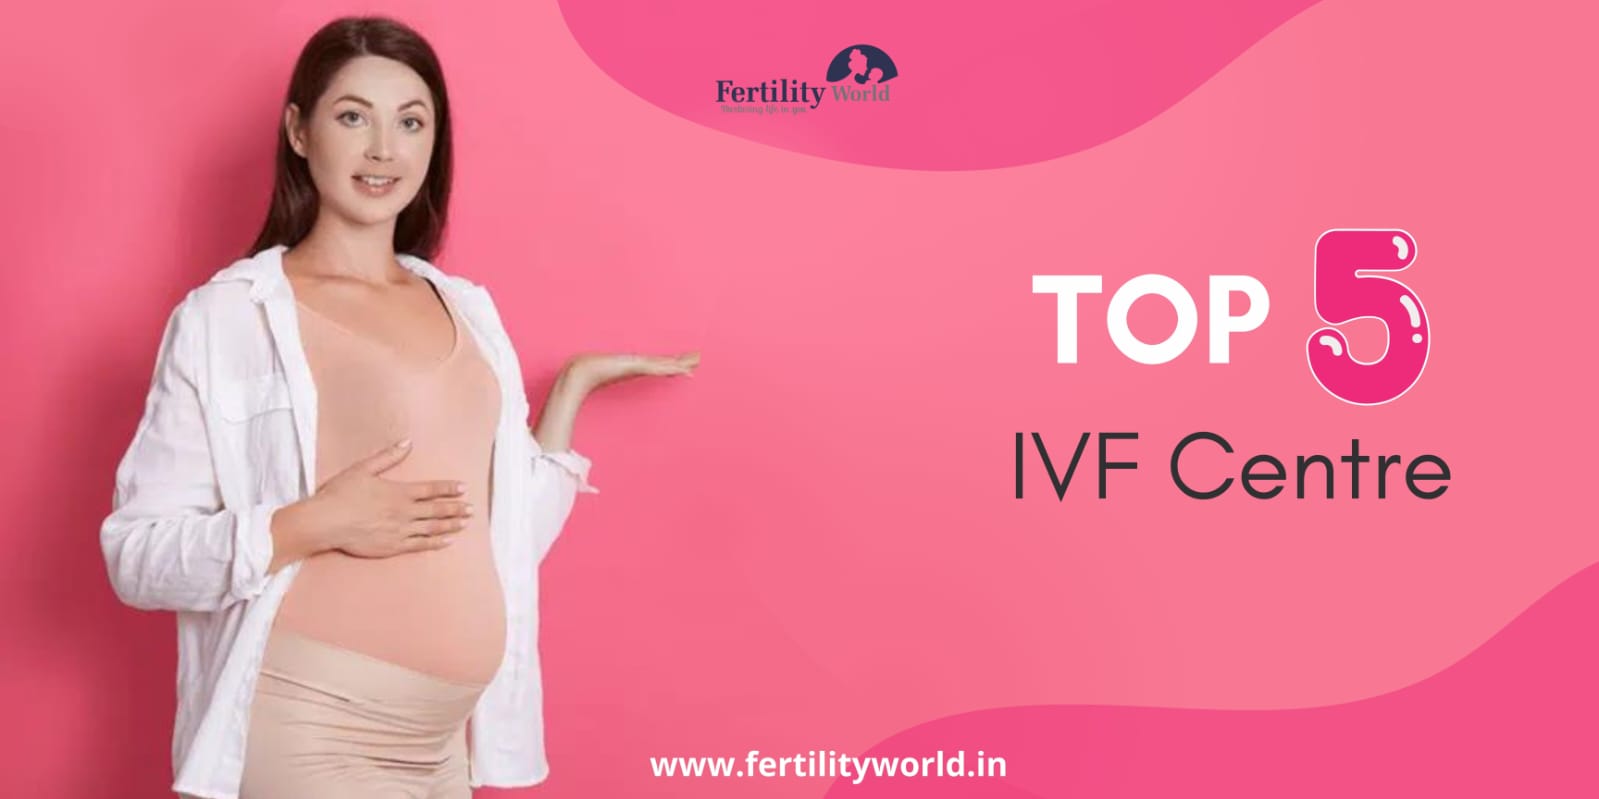 Top 5 IVF Centre in Ahmedabad